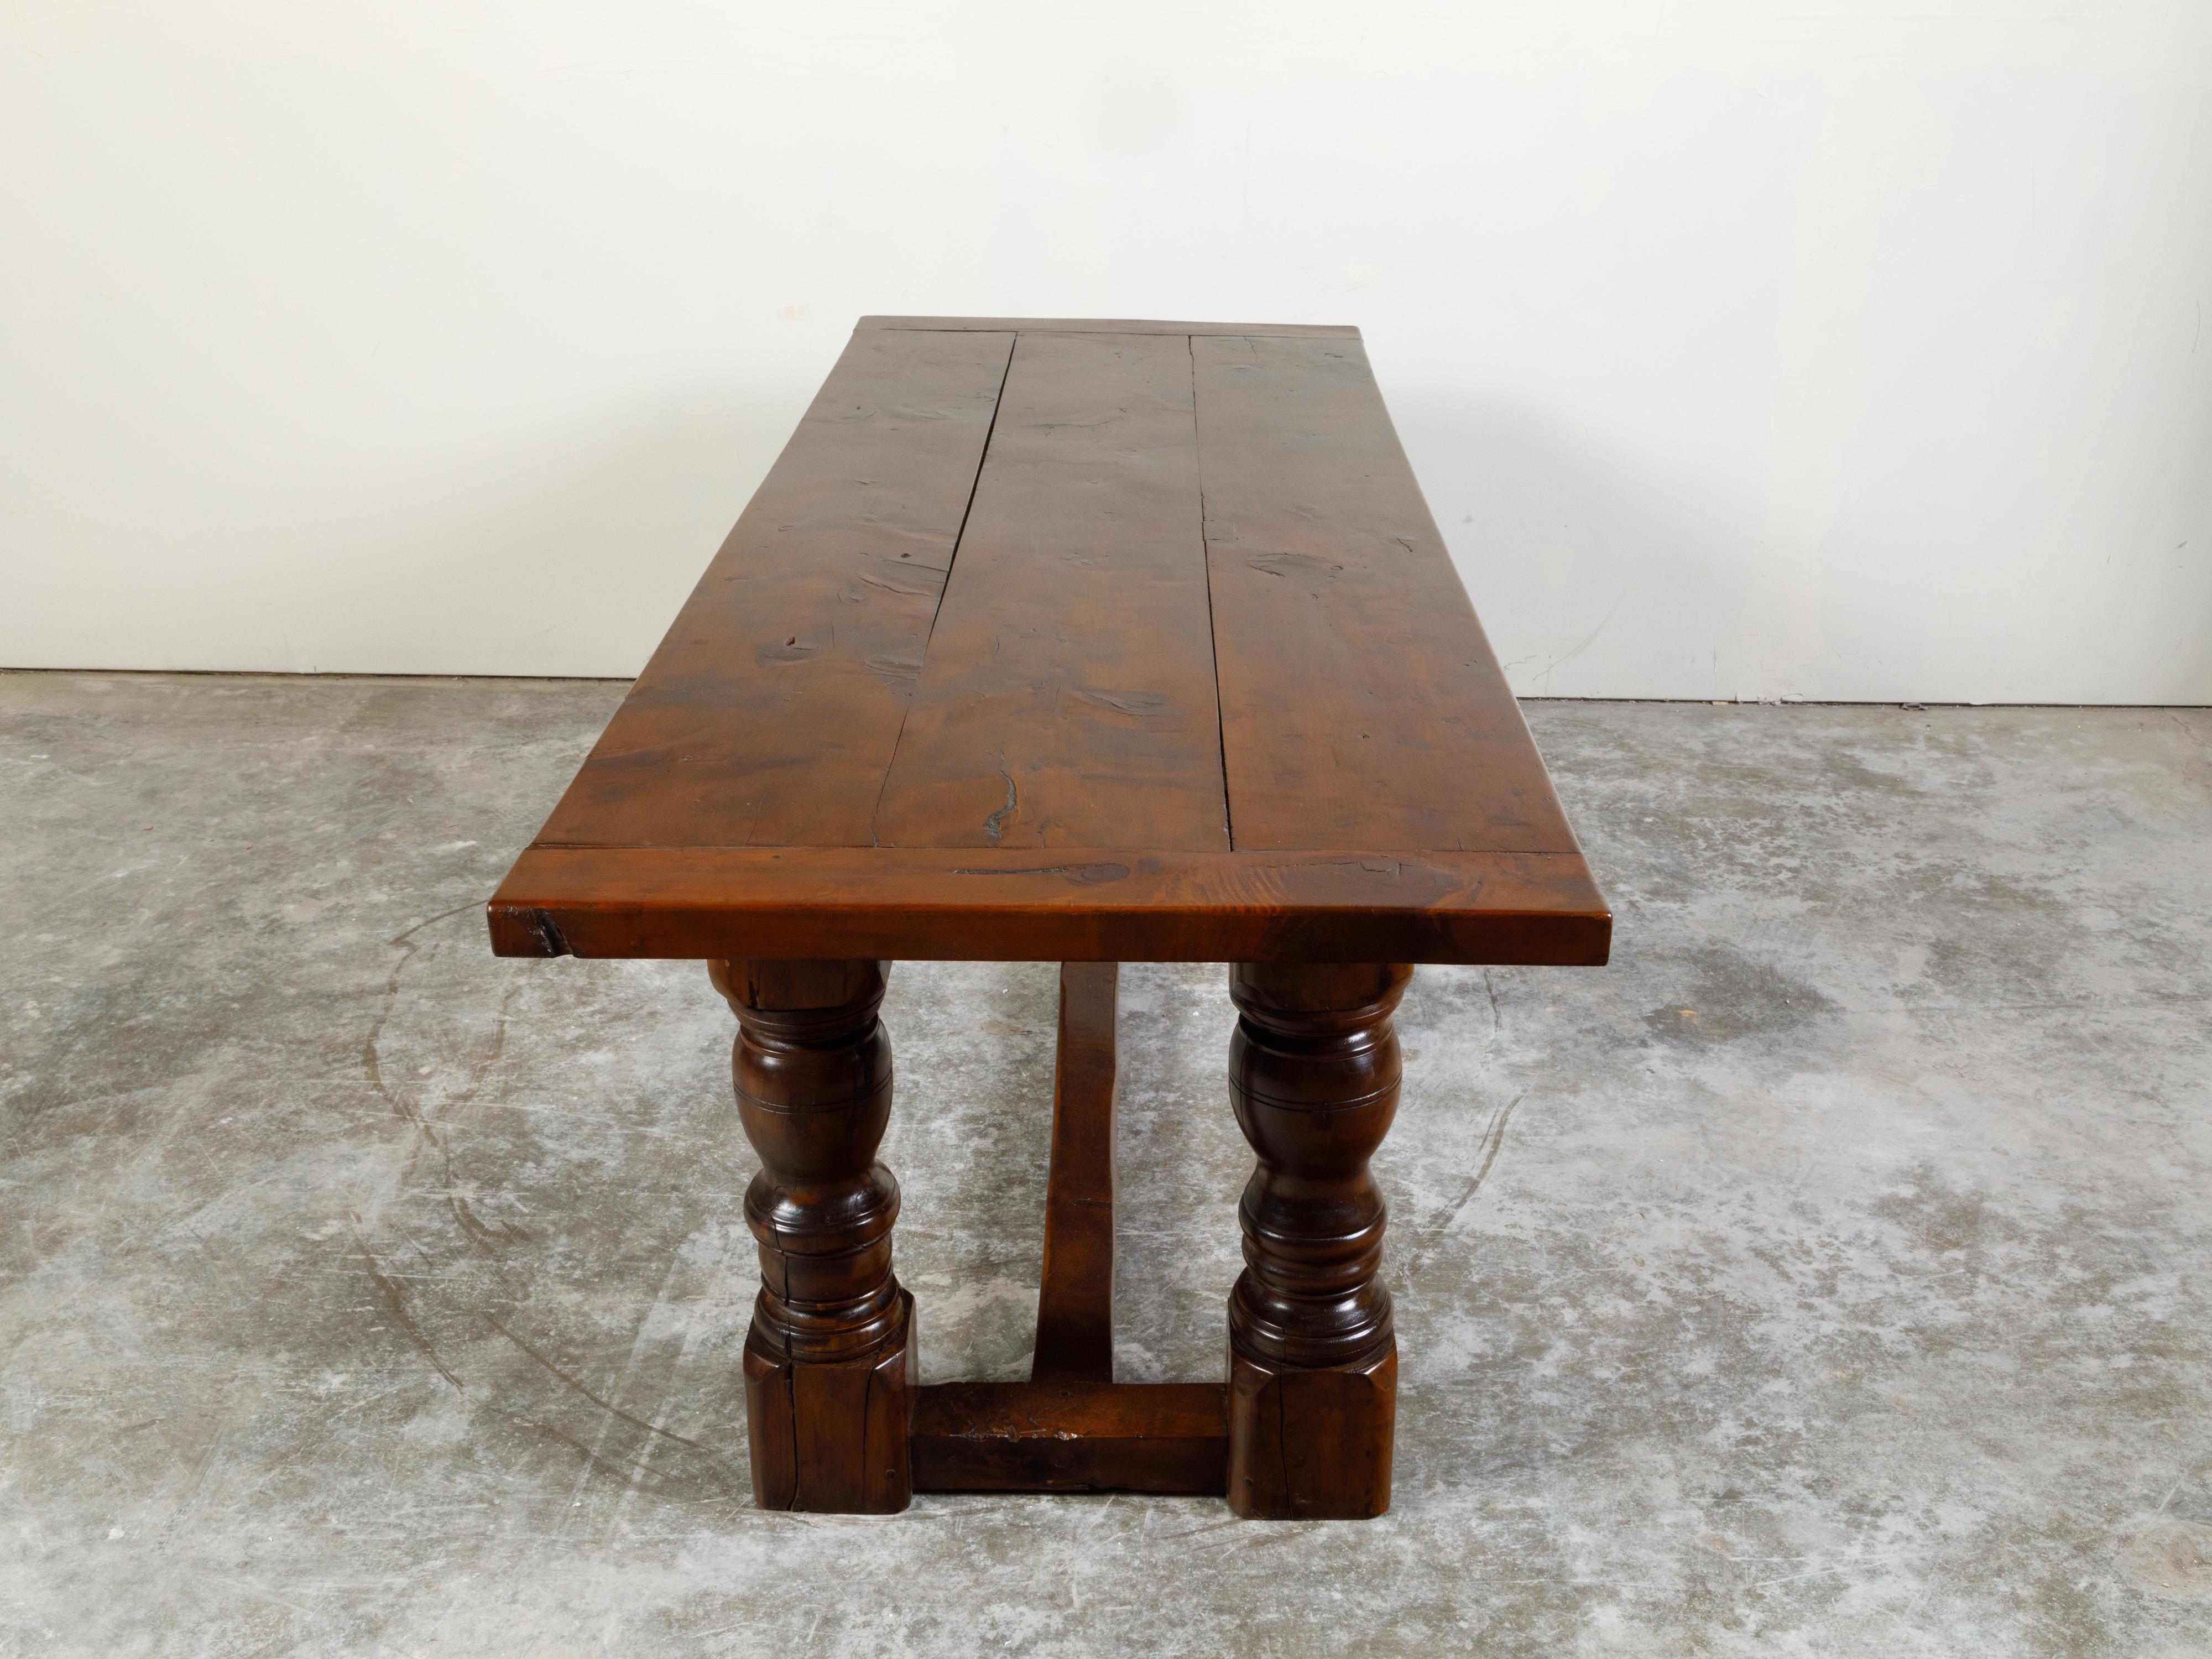 English 19th Century Walnut Dining Table with Turned Legs and H-Form Stretcher For Sale 4